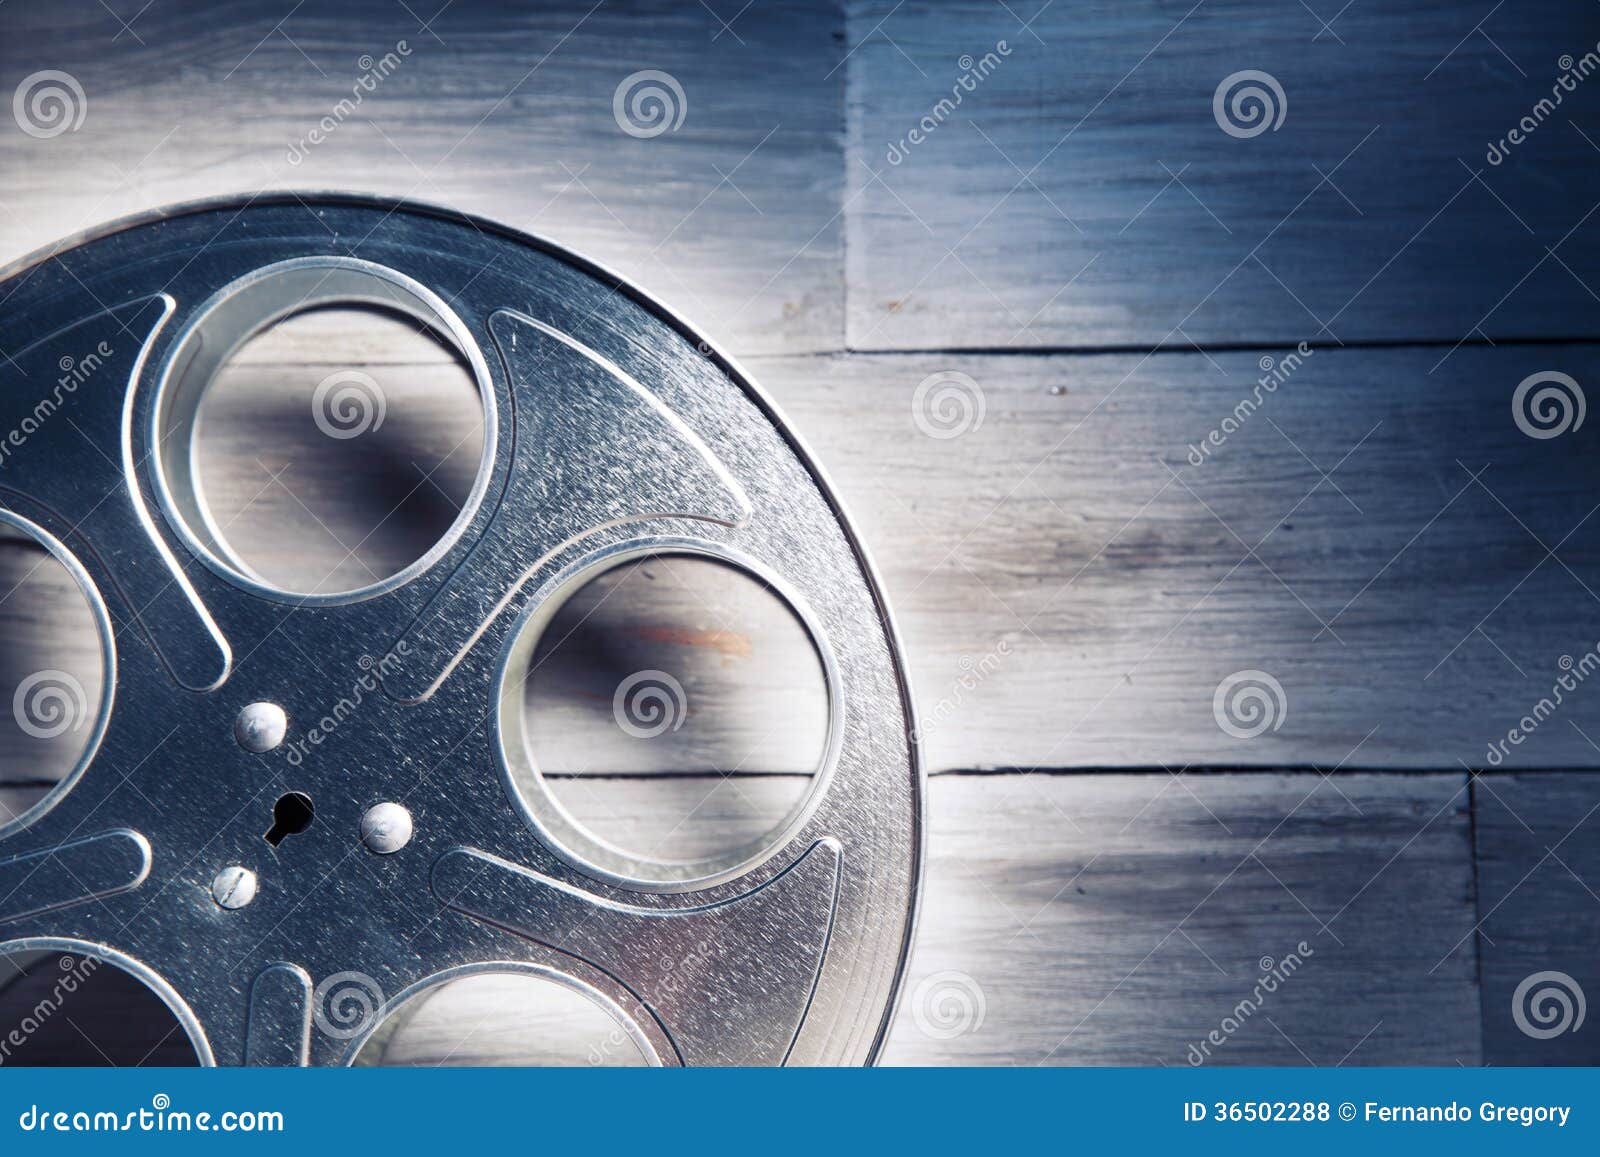 dramatic lit image of a movie reel